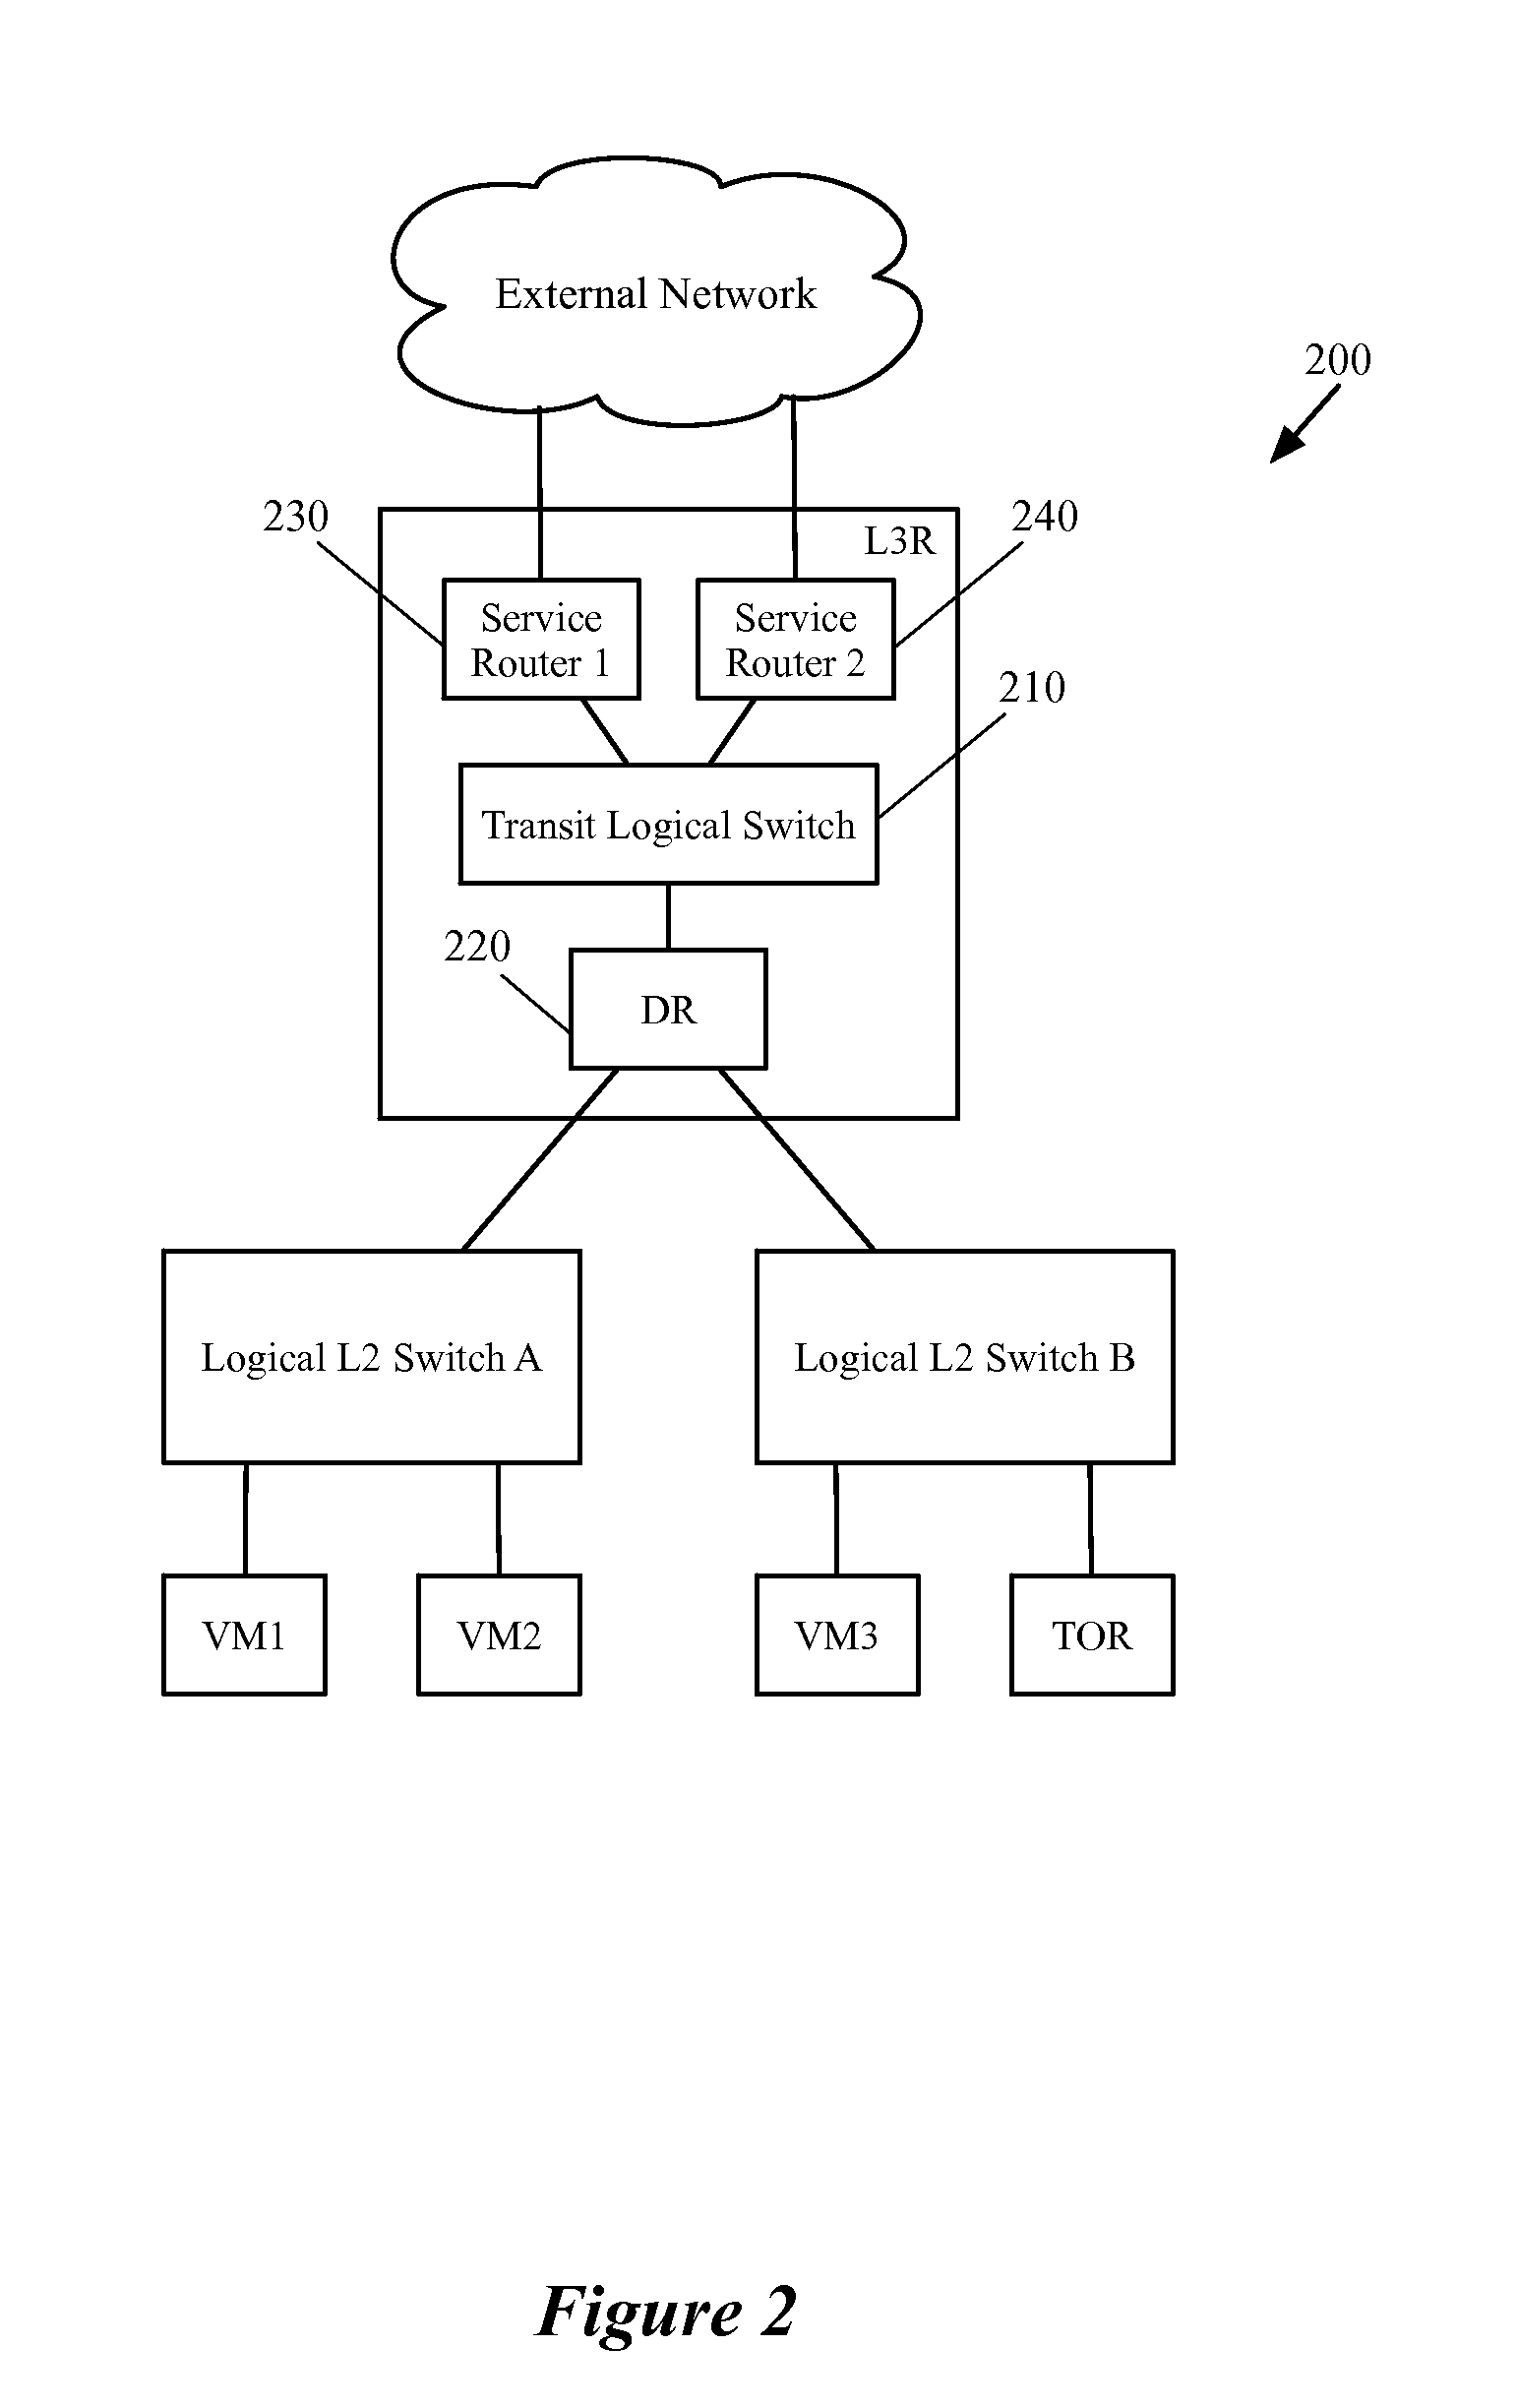 Enabling Hardware Switches to Perform Logical Routing Functionalities